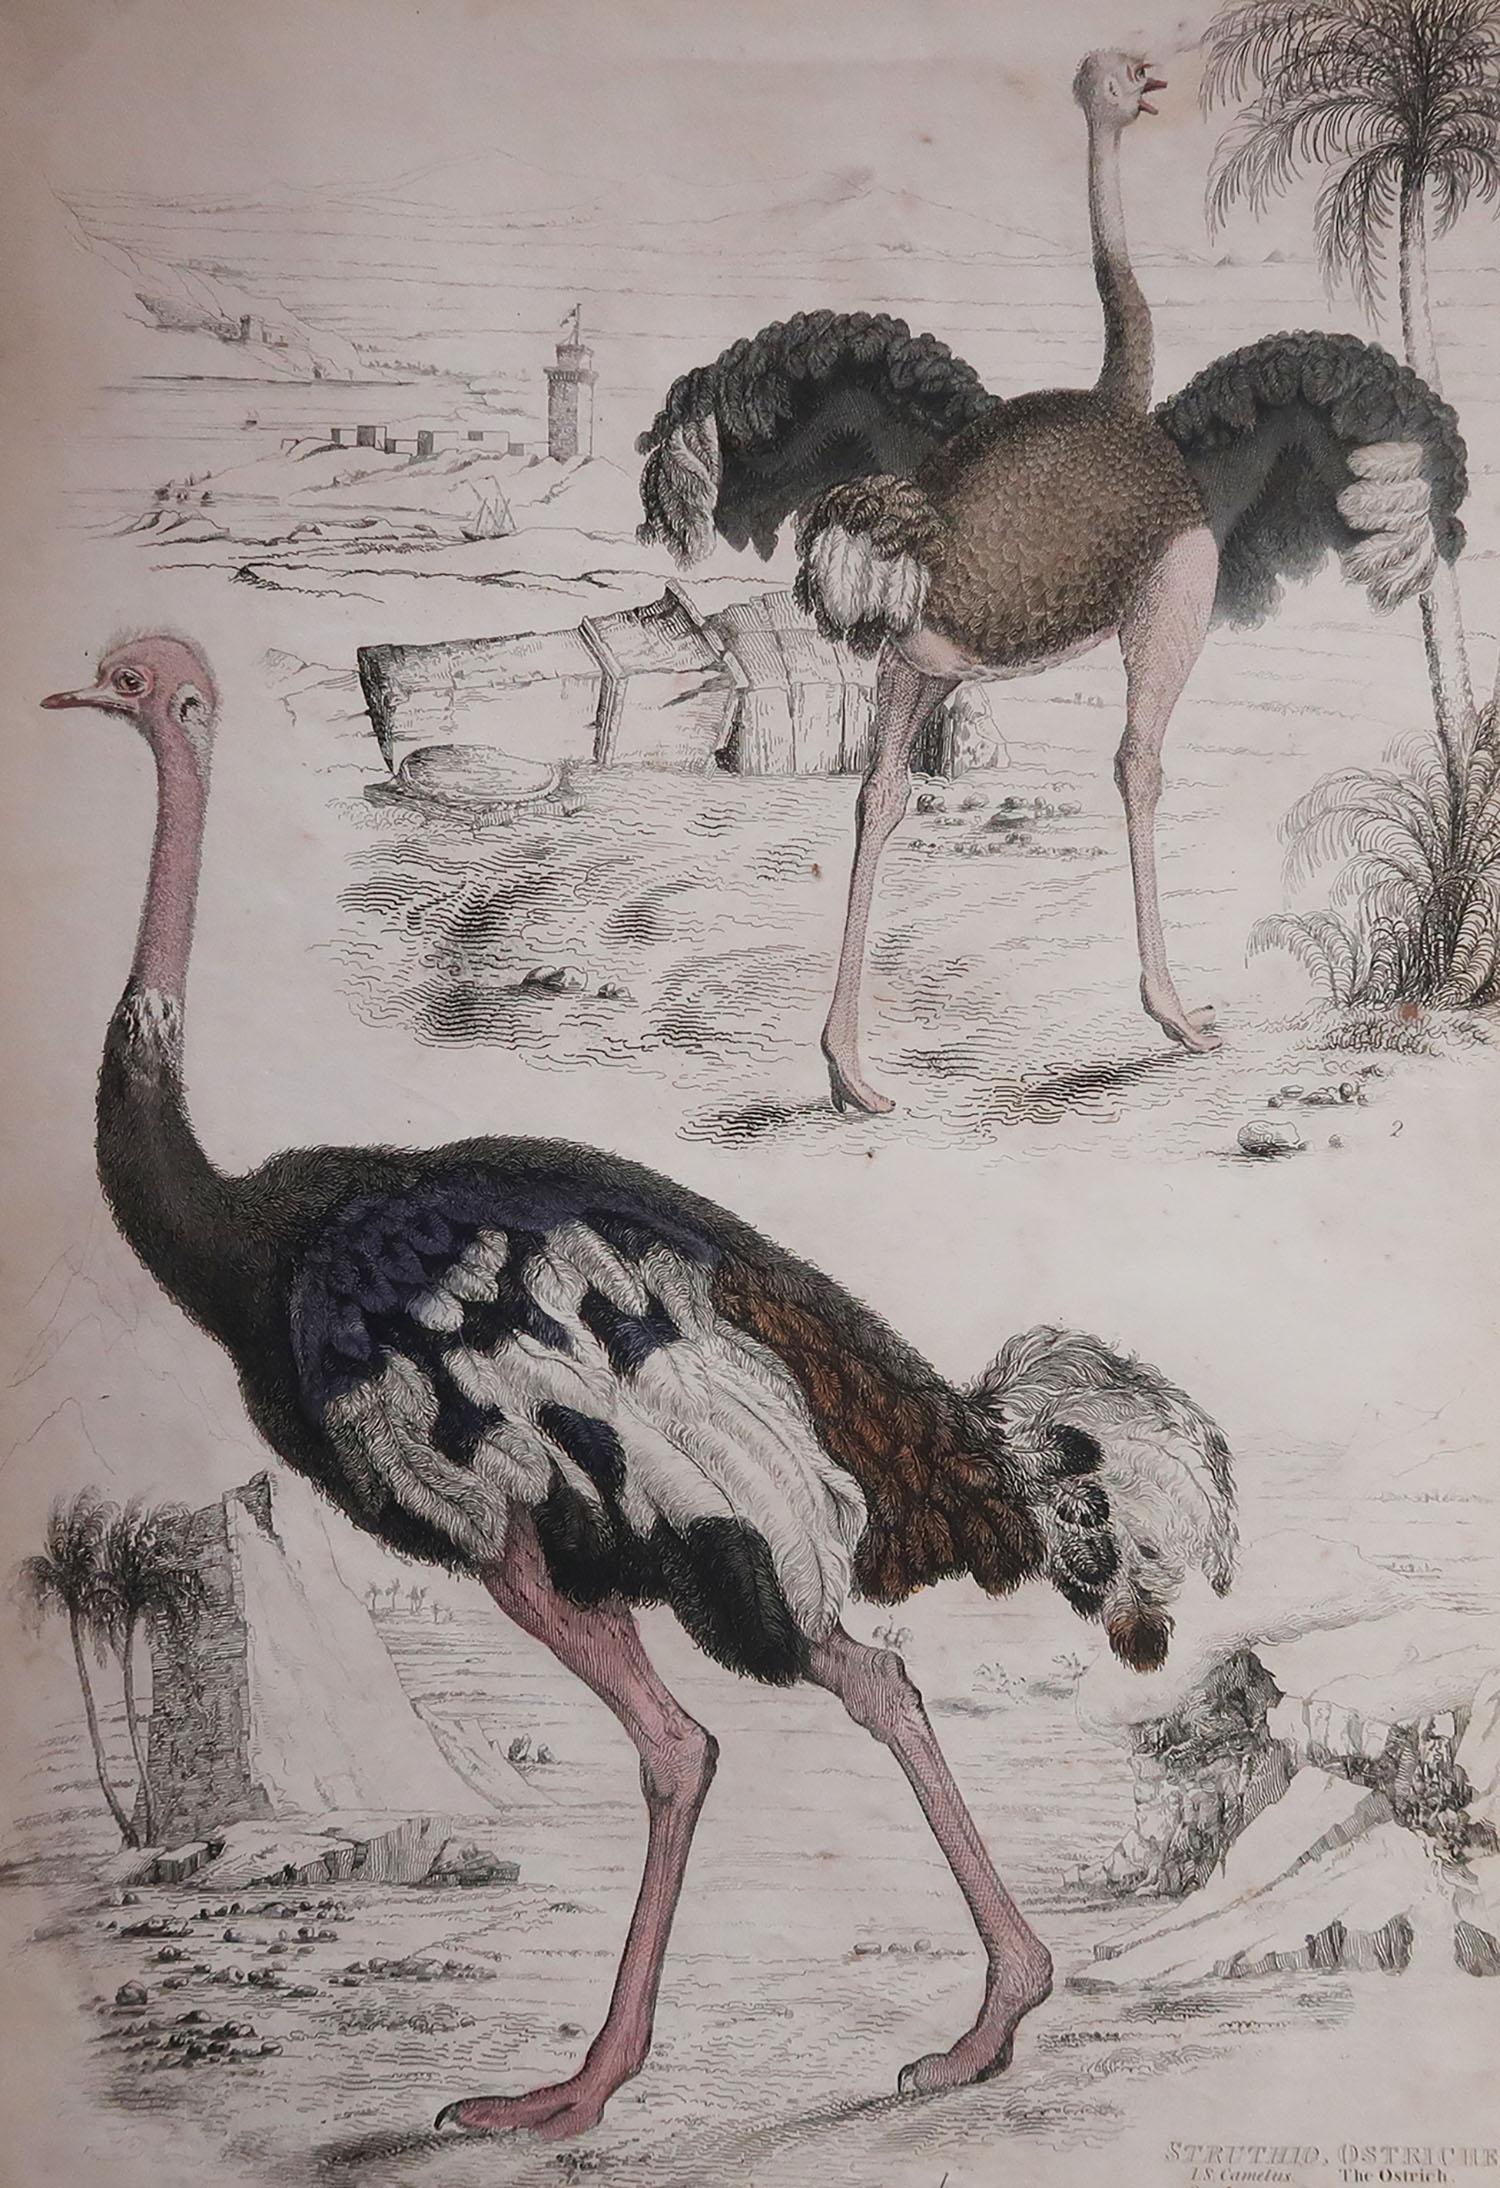 Great image of ostriches

Unframed. It gives you the option of perhaps making a set up using your own choice of frames.

Lithograph after Cpt. Brown with original hand color.

Published circa 1835

Repair to a minor edge tear on bottom